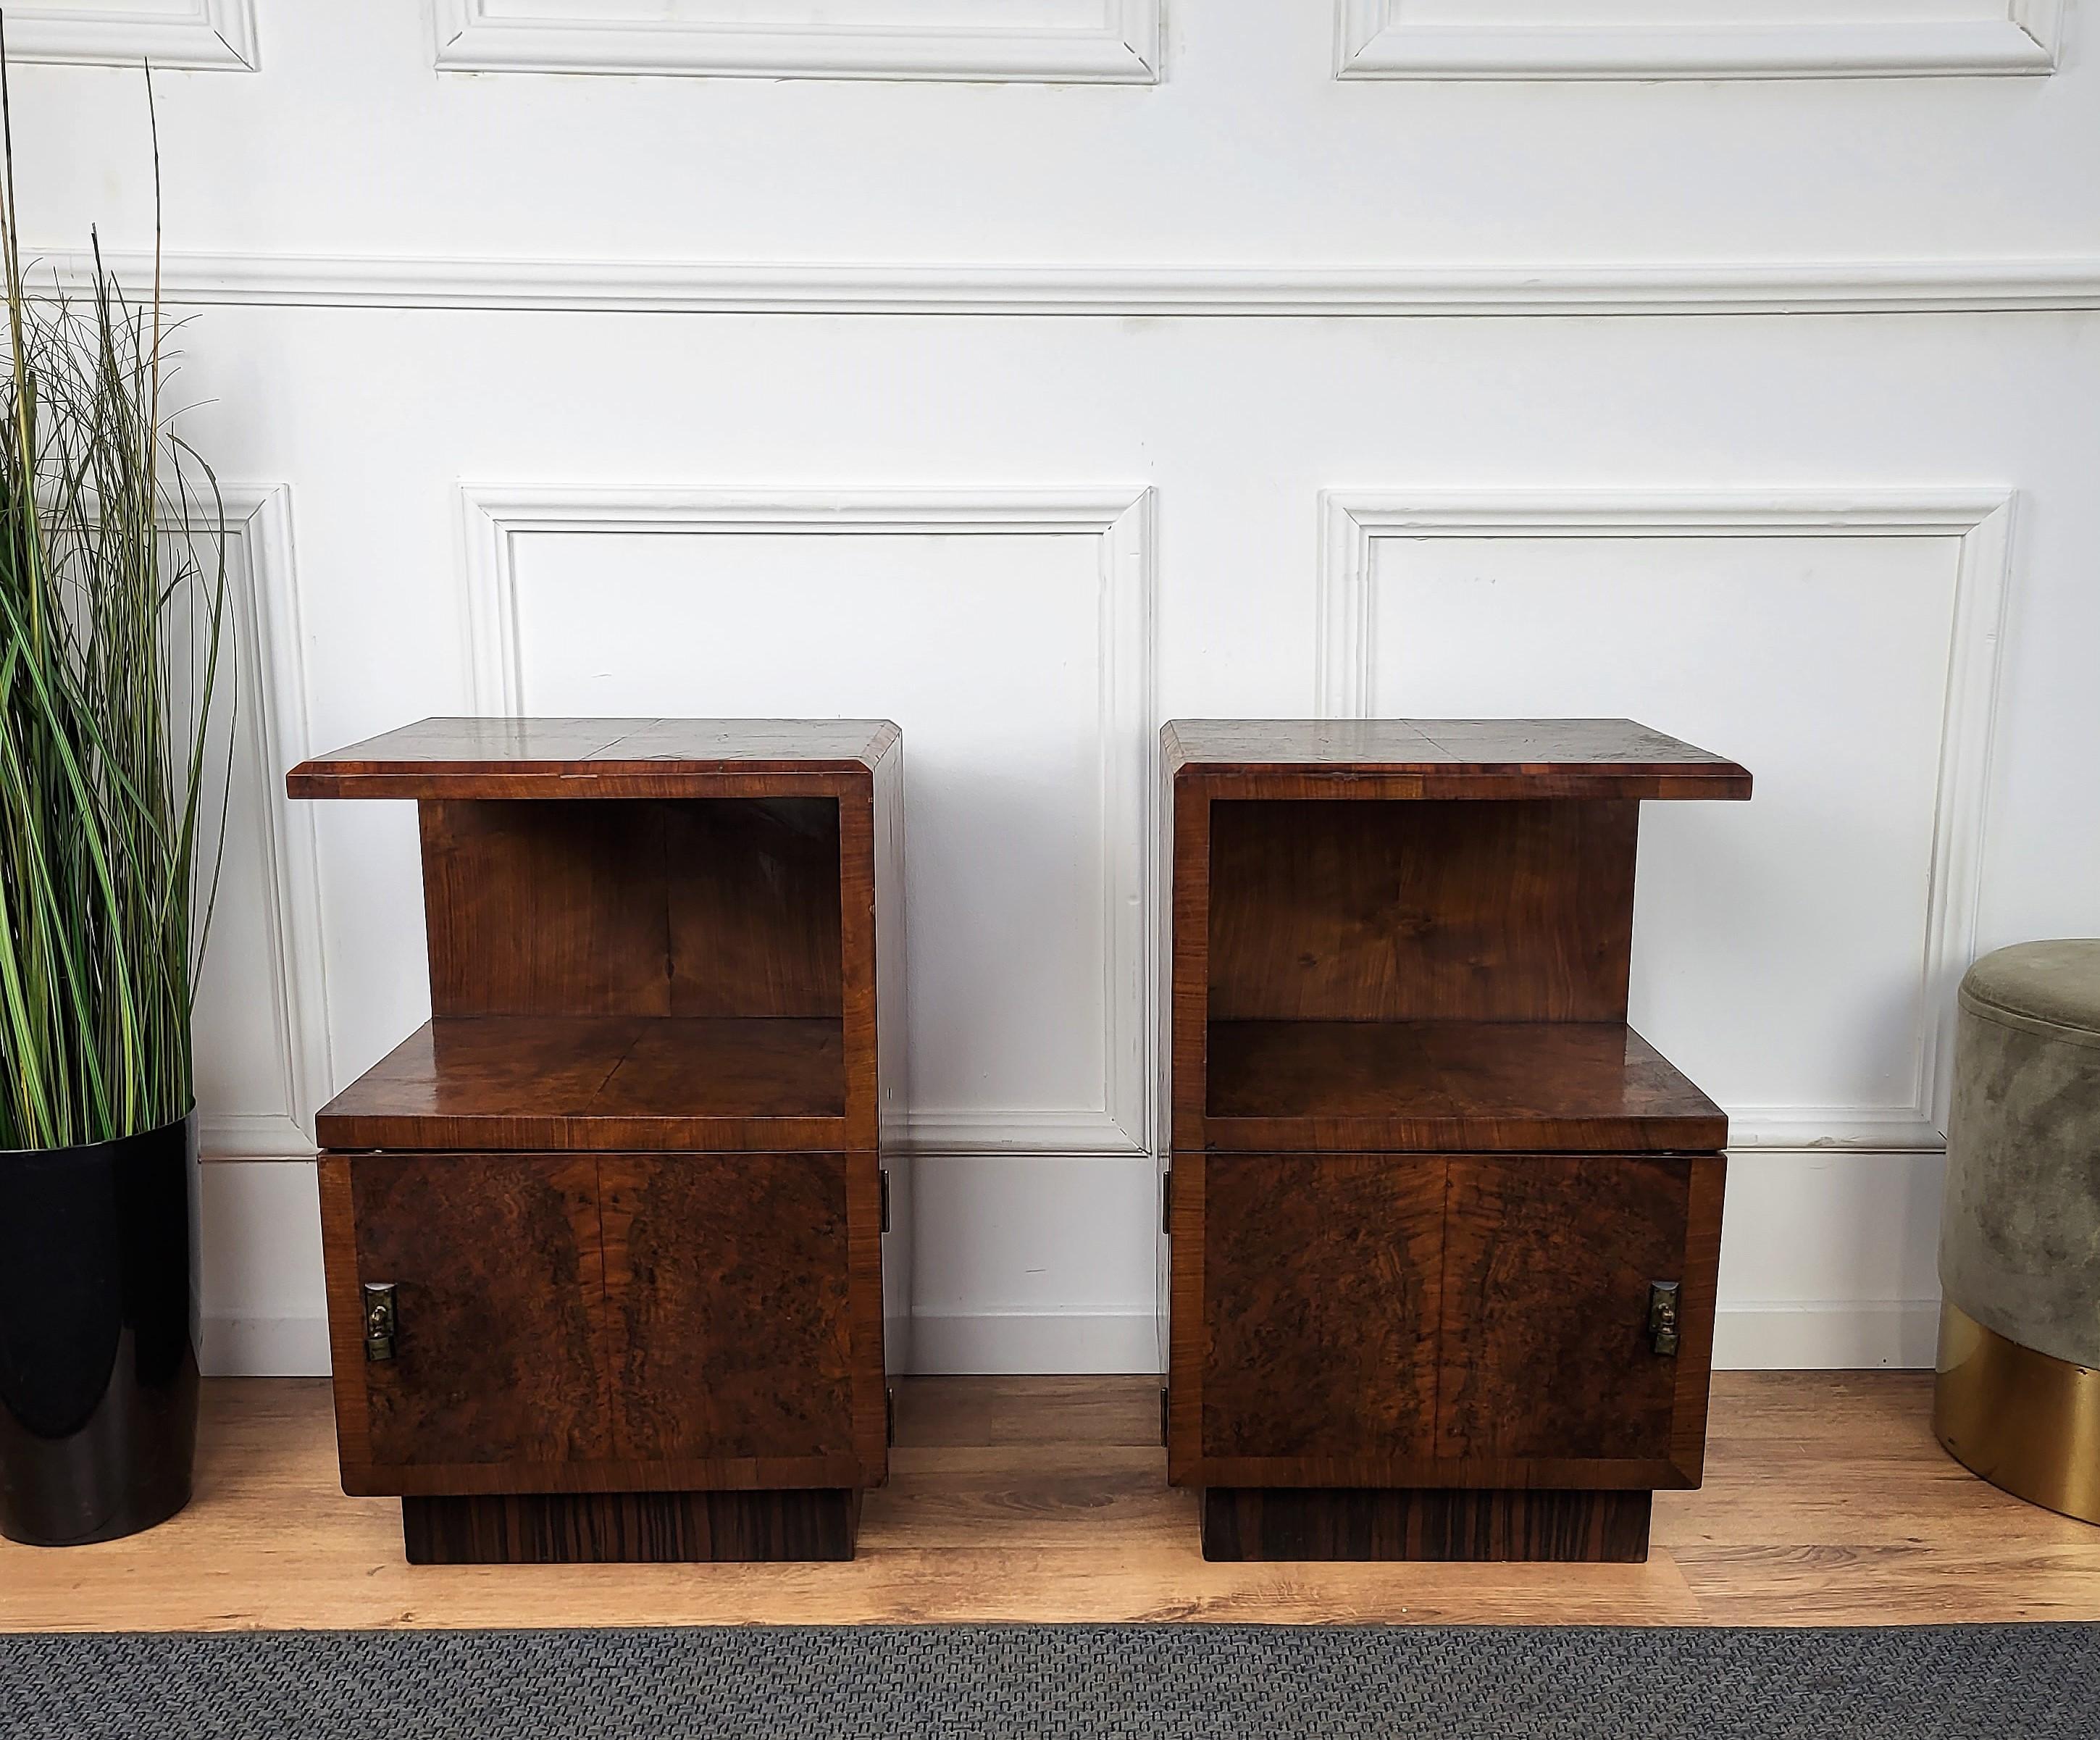 Very elegant and refined pair of Italian 1940s Art Deco bedside tables with great design shape and decors in veneer burl walnut briar wood and front door. This night stands make a great look in any style bedroom, as a complementary design and